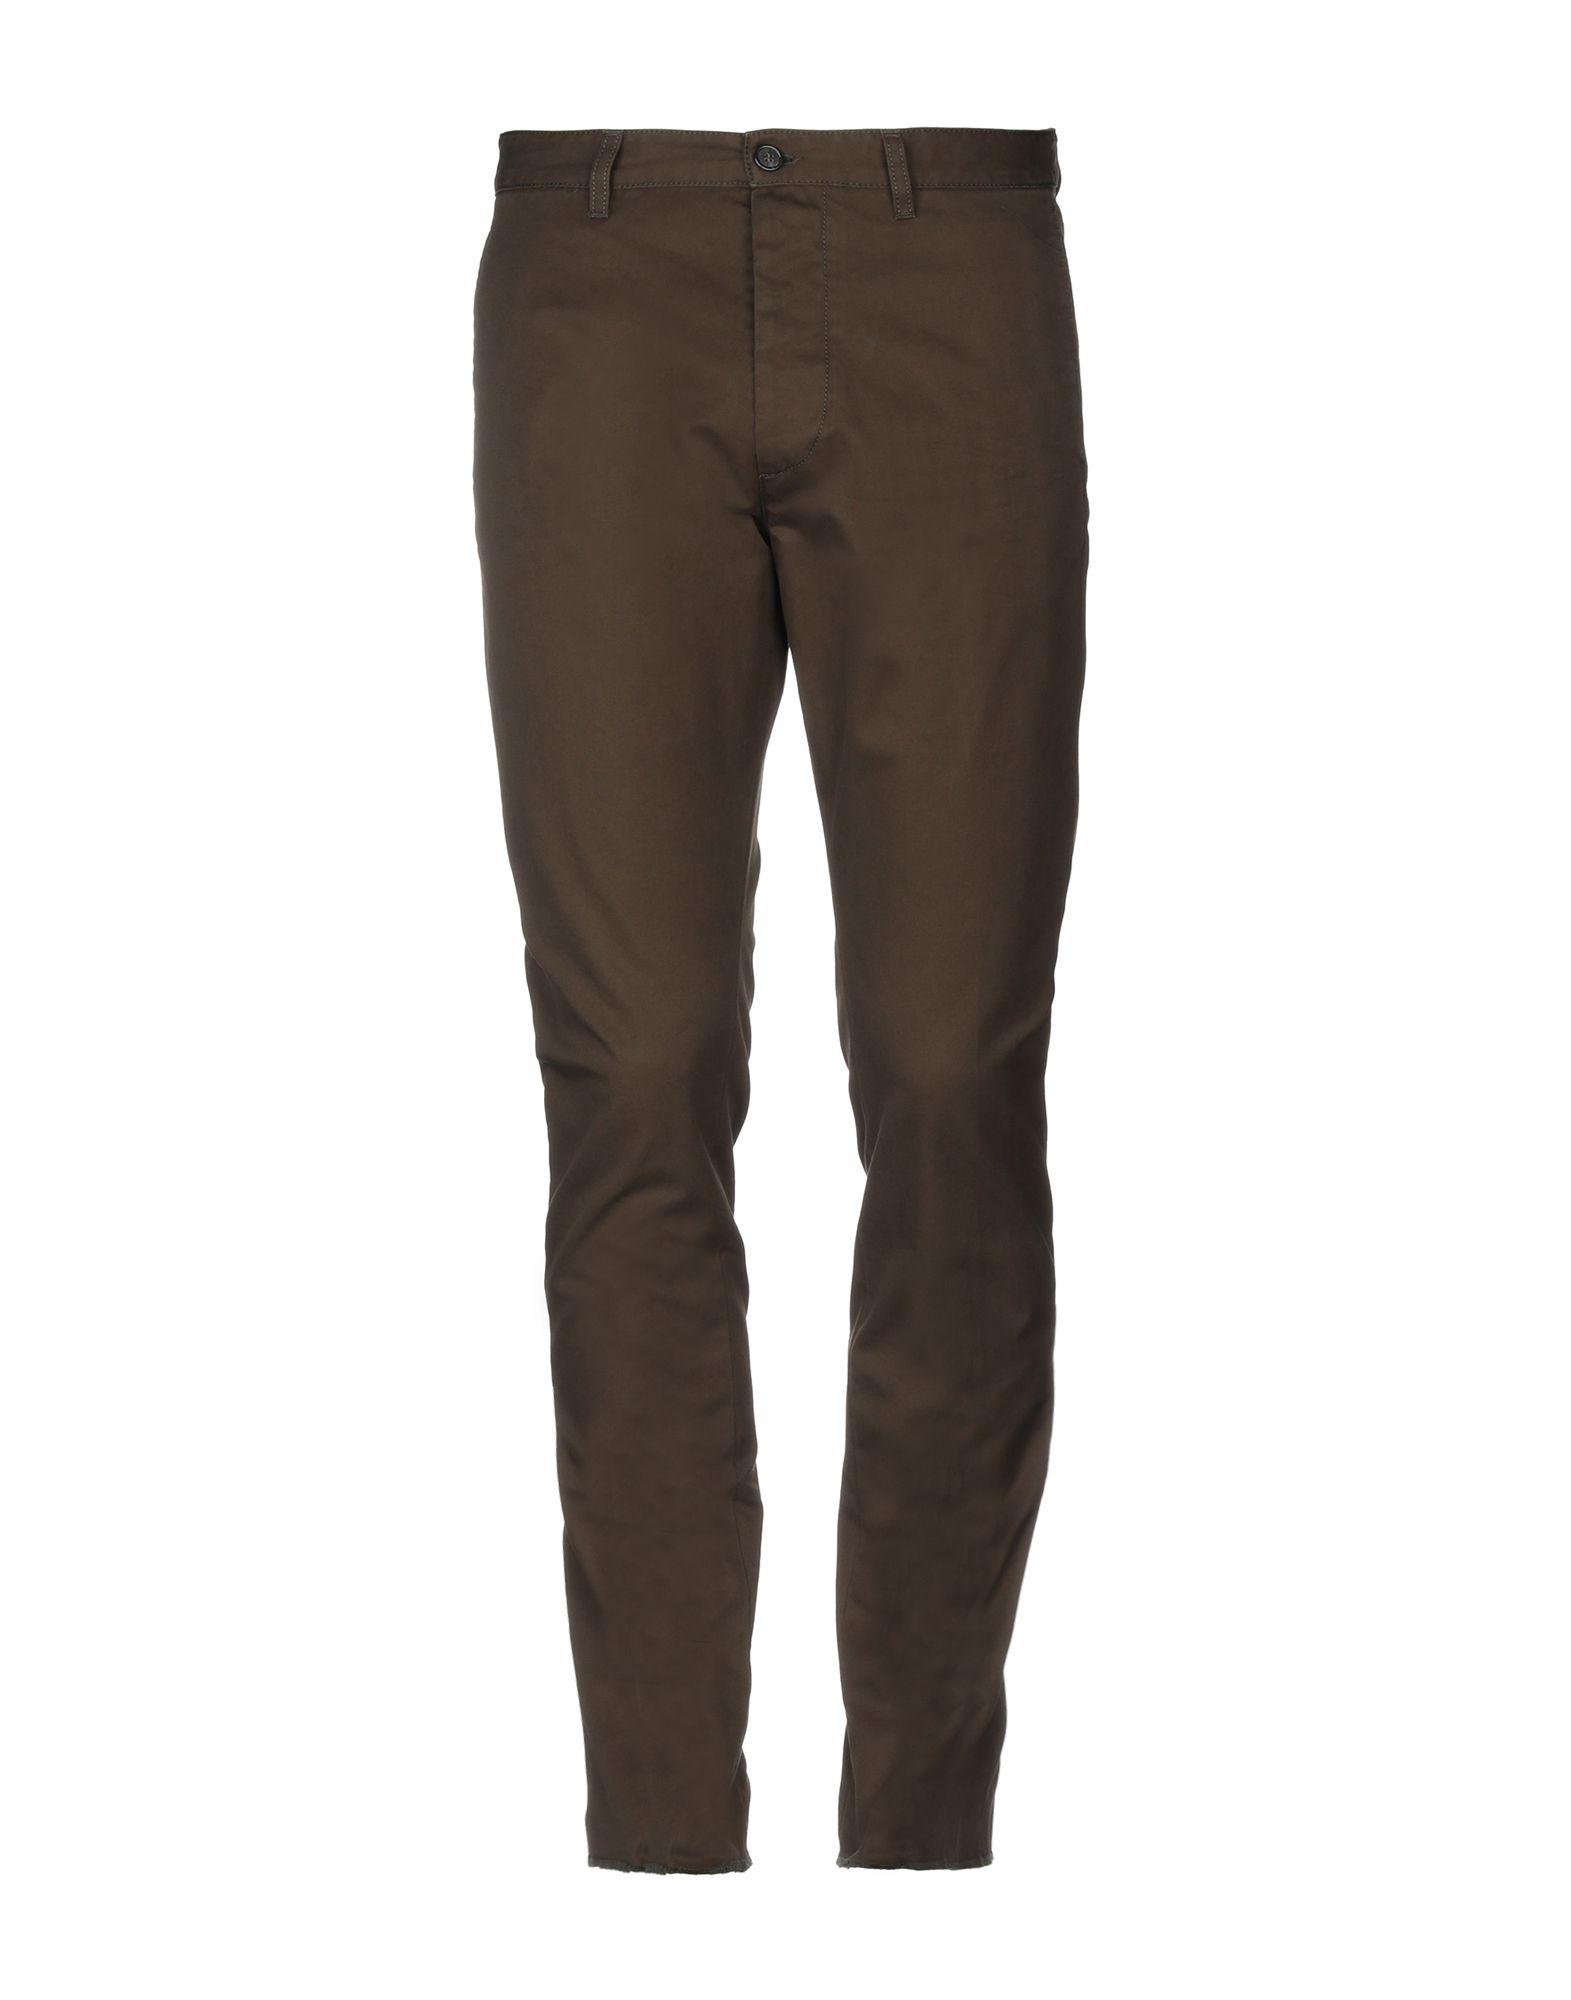 DSquared² Casual Trouser in Military Green (Green) for Men - Lyst